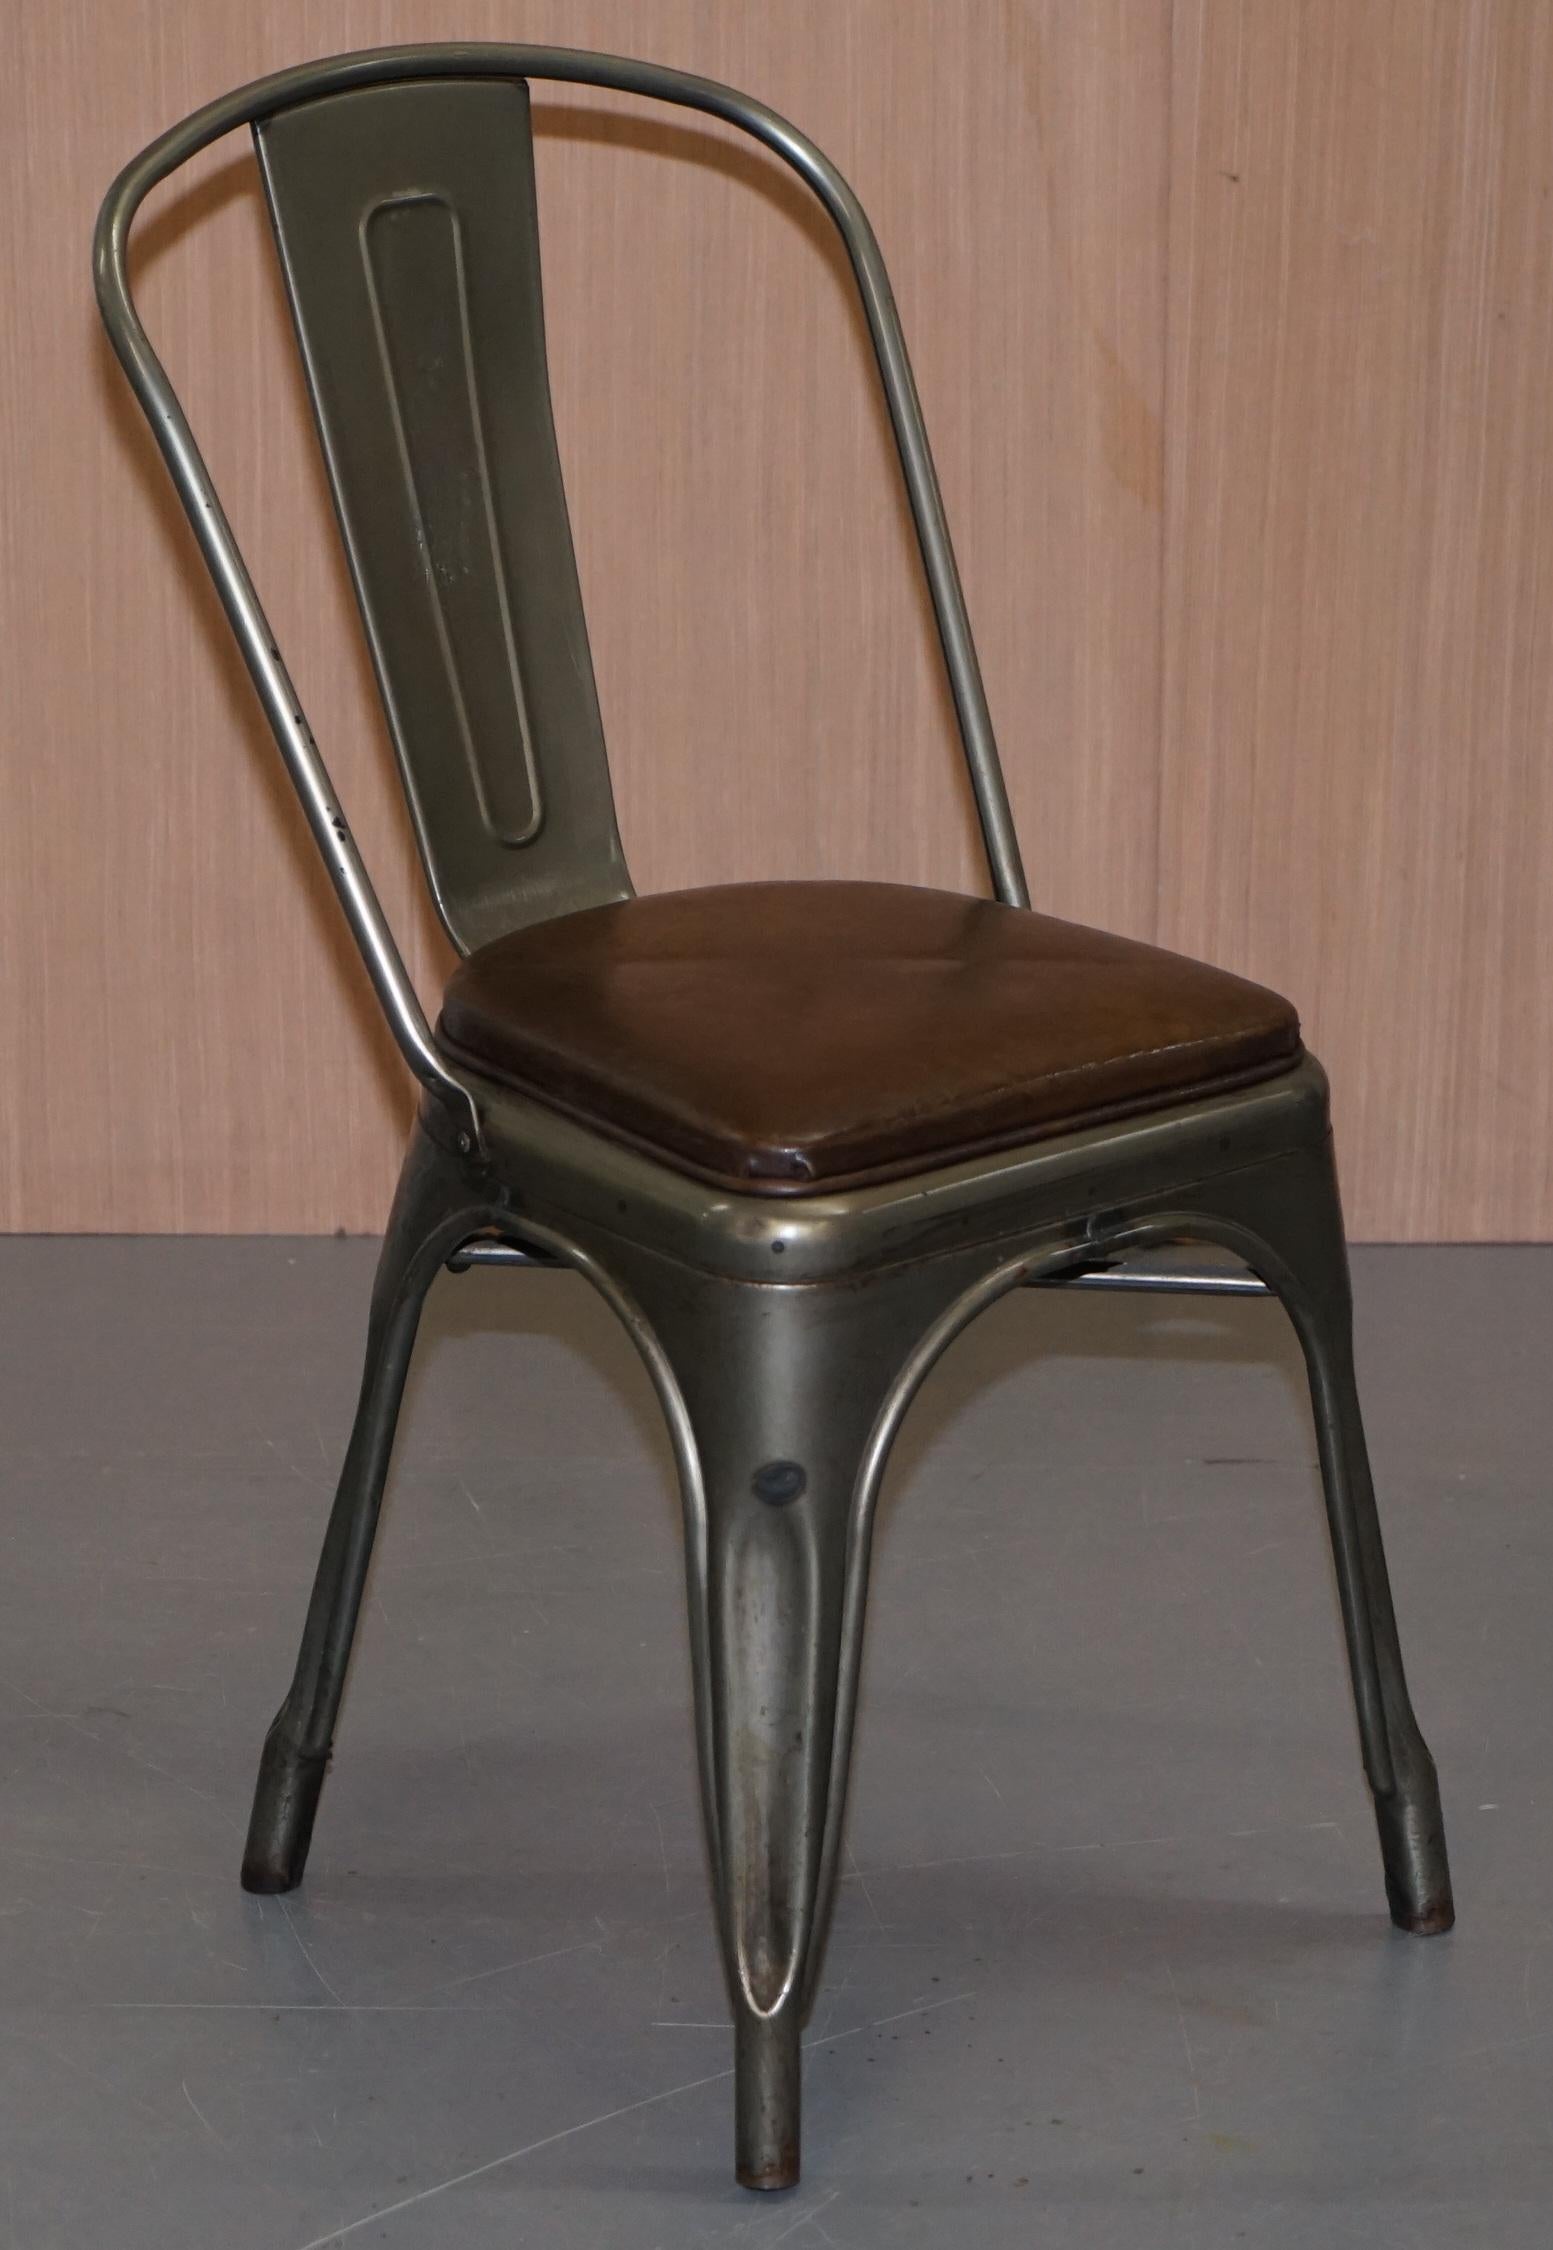 Set of Four Gun Metal Grey Stacking Chairs Tolix V2 with Upholstered Seat Pad 10